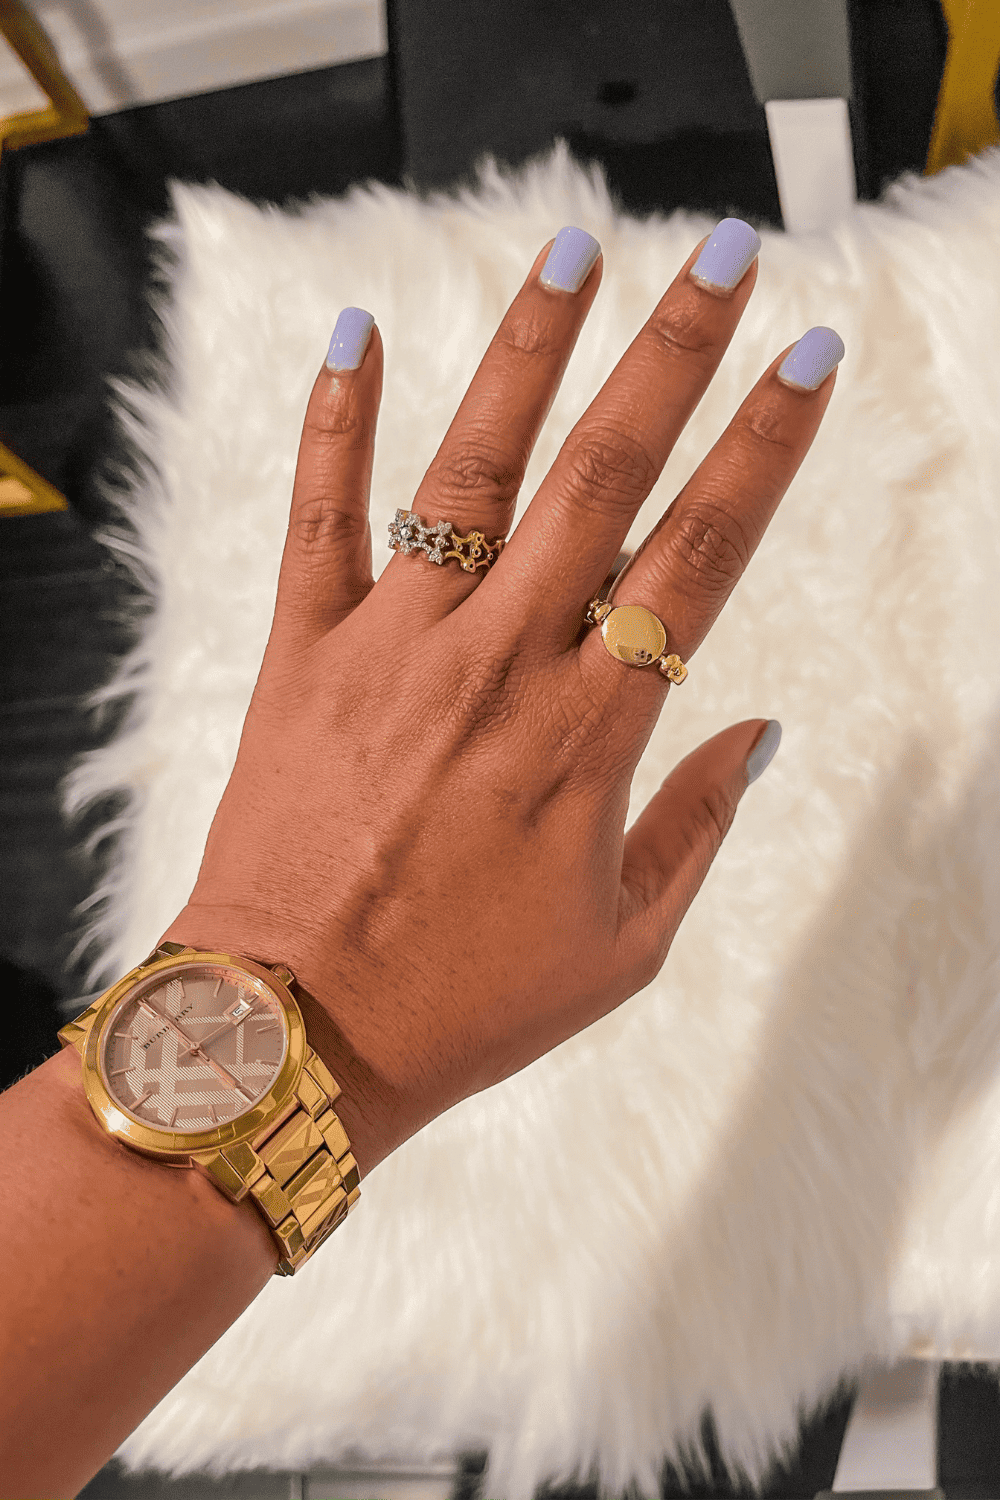 How To Get Professional Gellac At Home & Save Money